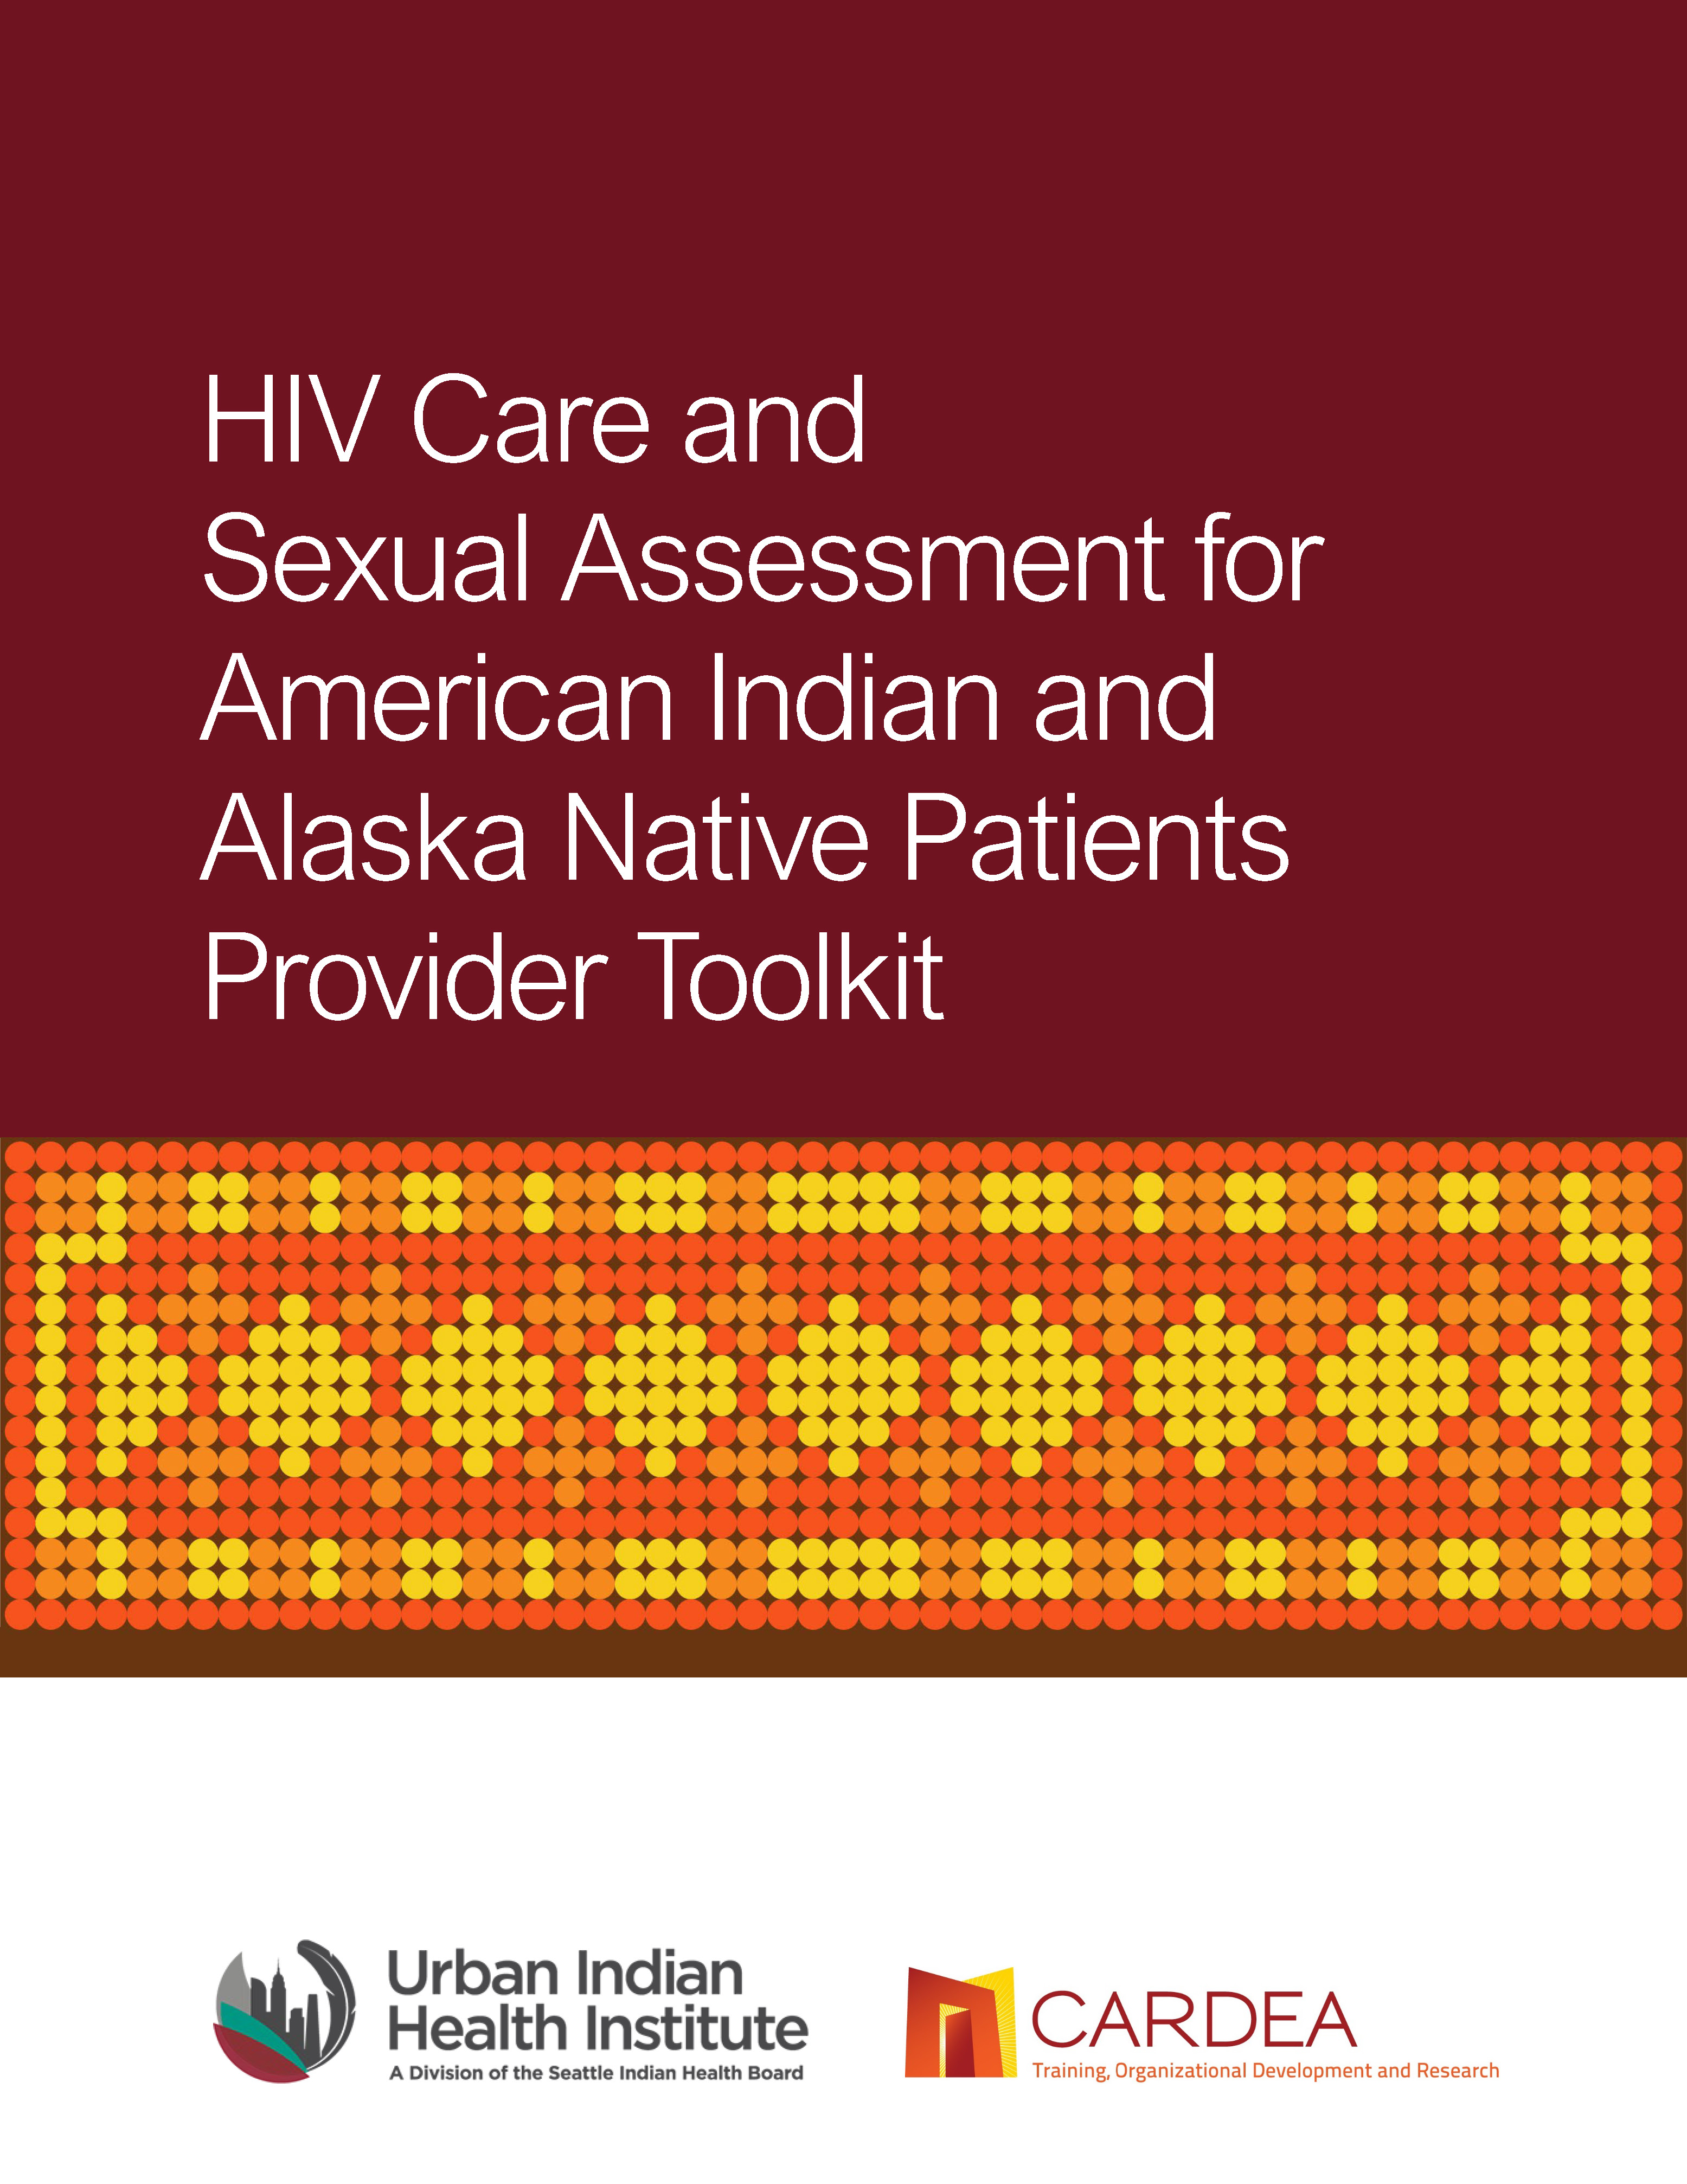 HIV Care and Sexual Assessment for American Indian and Alaska Native Patients Provider Toolkit